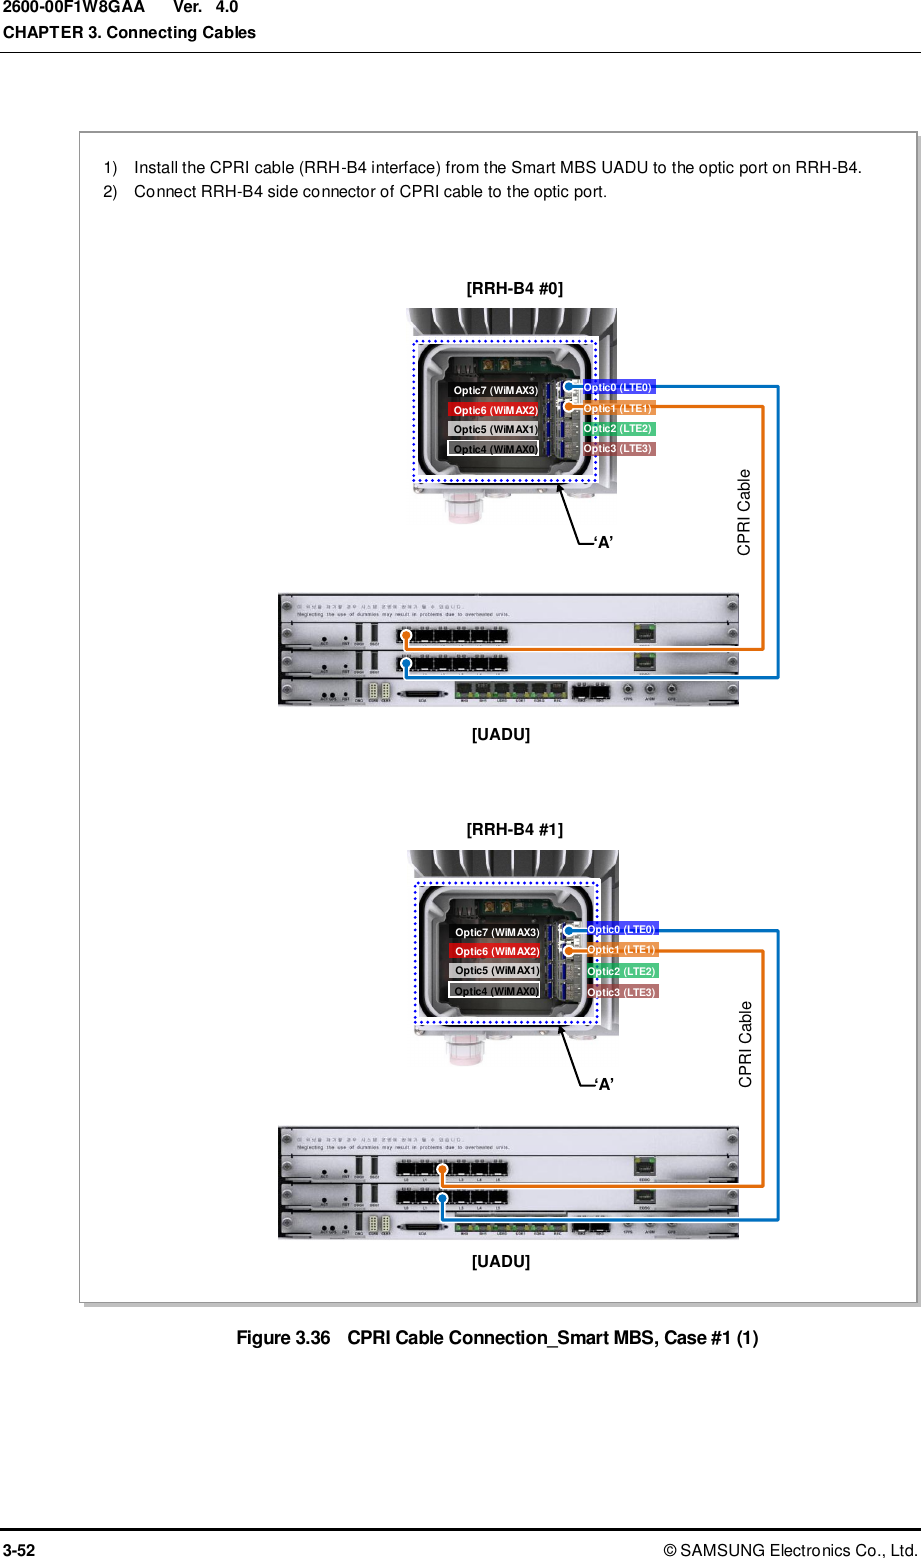  Ver.  CHAPTER 3. Connecting Cables 3-52 ©  SAMSUNG Electronics Co., Ltd. 2600-00F1W8GAA 4.0  Figure 3.36  CPRI Cable Connection_Smart MBS, Case #1 (1)  Optic4 (WiMAX0) Optic6 (WiMAX2) Optic5 (WiMAX1) Optic7 (WiMAX3) ‘A’ [RRH-B4 #0] Optic4 (WiMAX0) Optic6 (WiMAX2) Optic5 (WiMAX1) Optic7 (WiMAX3) 1)    Install the CPRI cable (RRH-B4 interface) from the Smart MBS UADU to the optic port on RRH-B4. 2)    Connect RRH-B4 side connector of CPRI cable to the optic port.     [UADU] ‘A’ CPRI Cable CPRI Cable [UADU] [RRH-B4 #1] Optic0 (LTE0) Optic1 (LTE1) Optic2 (LTE2) Optic3 (LTE3) Optic0 (LTE0) Optic1 (LTE1) Optic2 (LTE2) Optic3 (LTE3) 